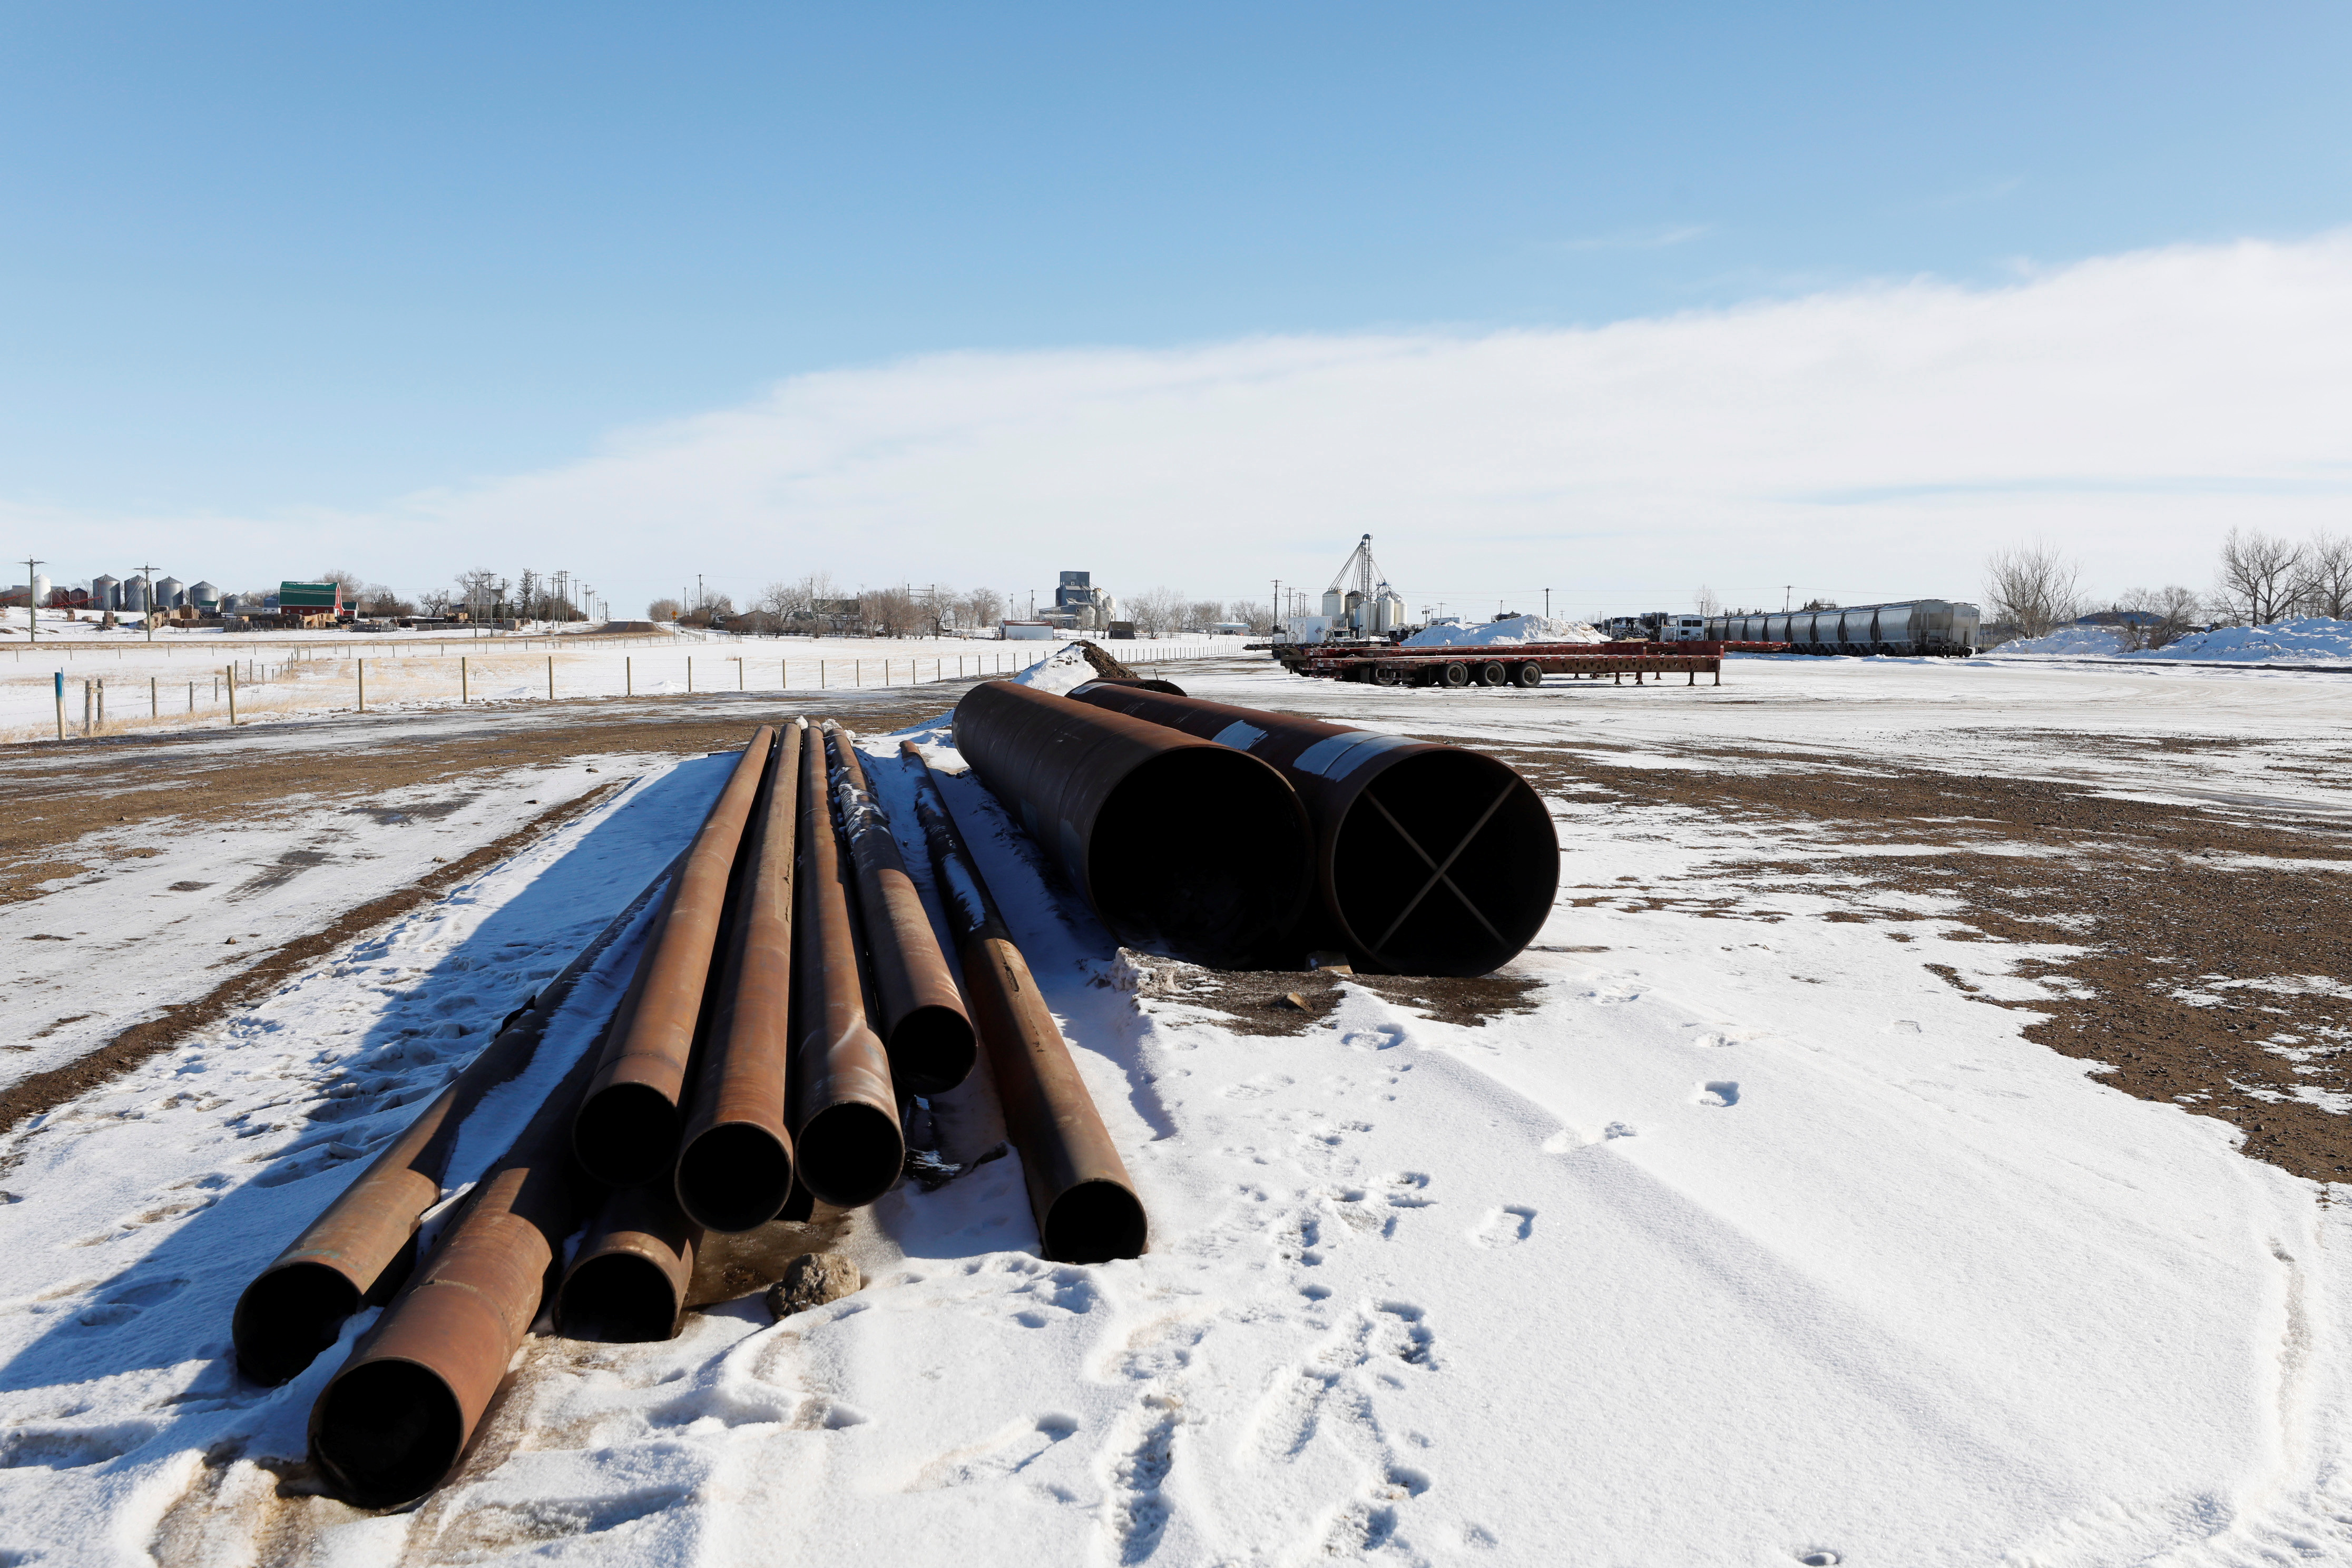 A supply depot servicing the Keystone XL crude oil pipeline lies idle in Oyen